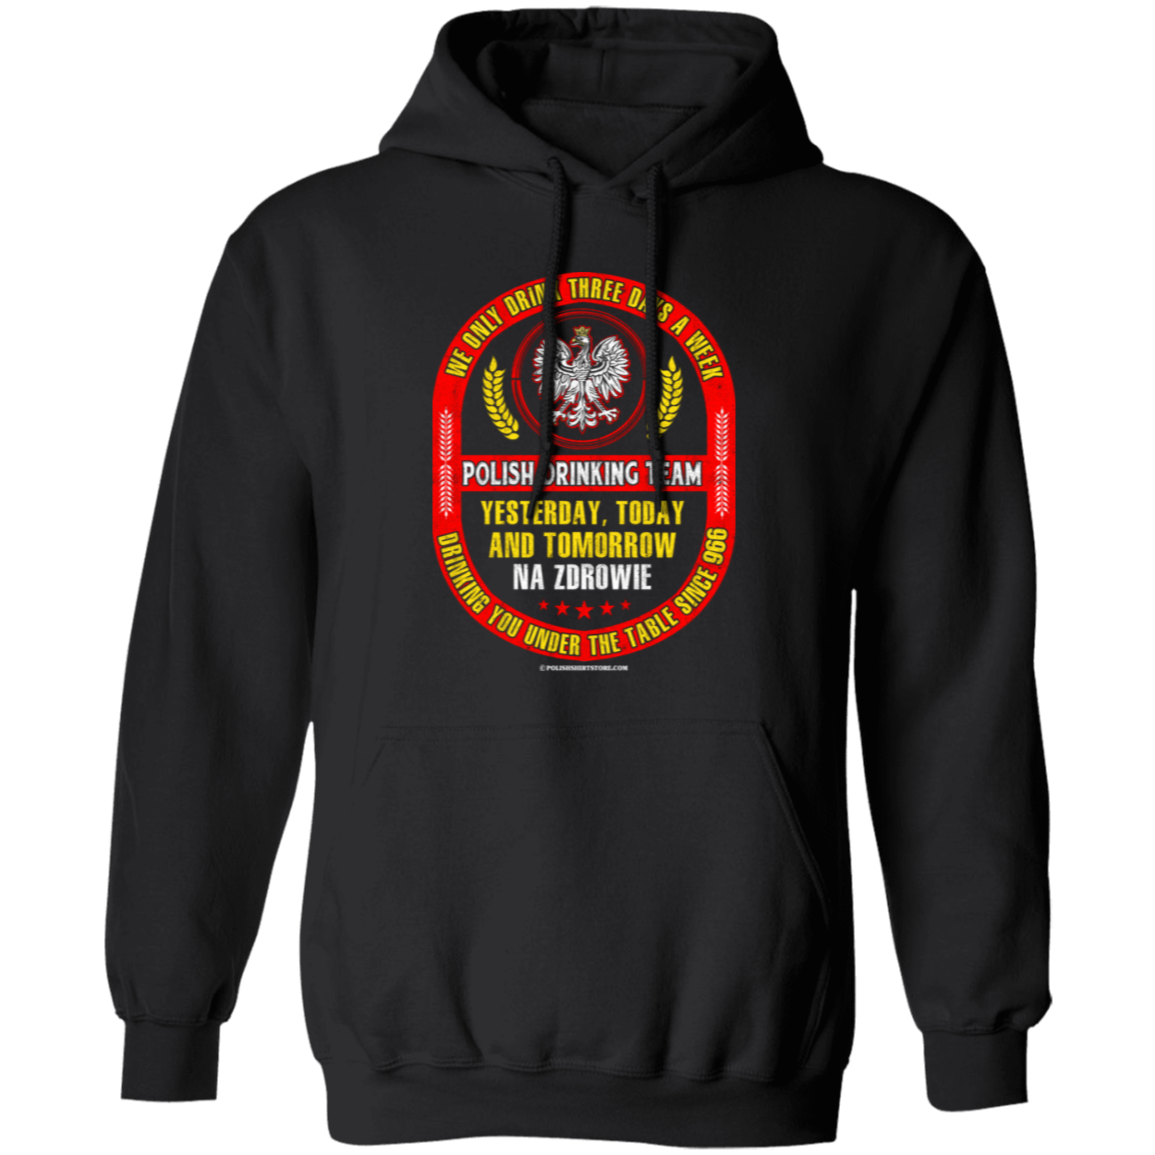 Polish Drinking Team Yesterday Today and Tomorrow Apparel CustomCat G185 Pullover Hoodie Black S